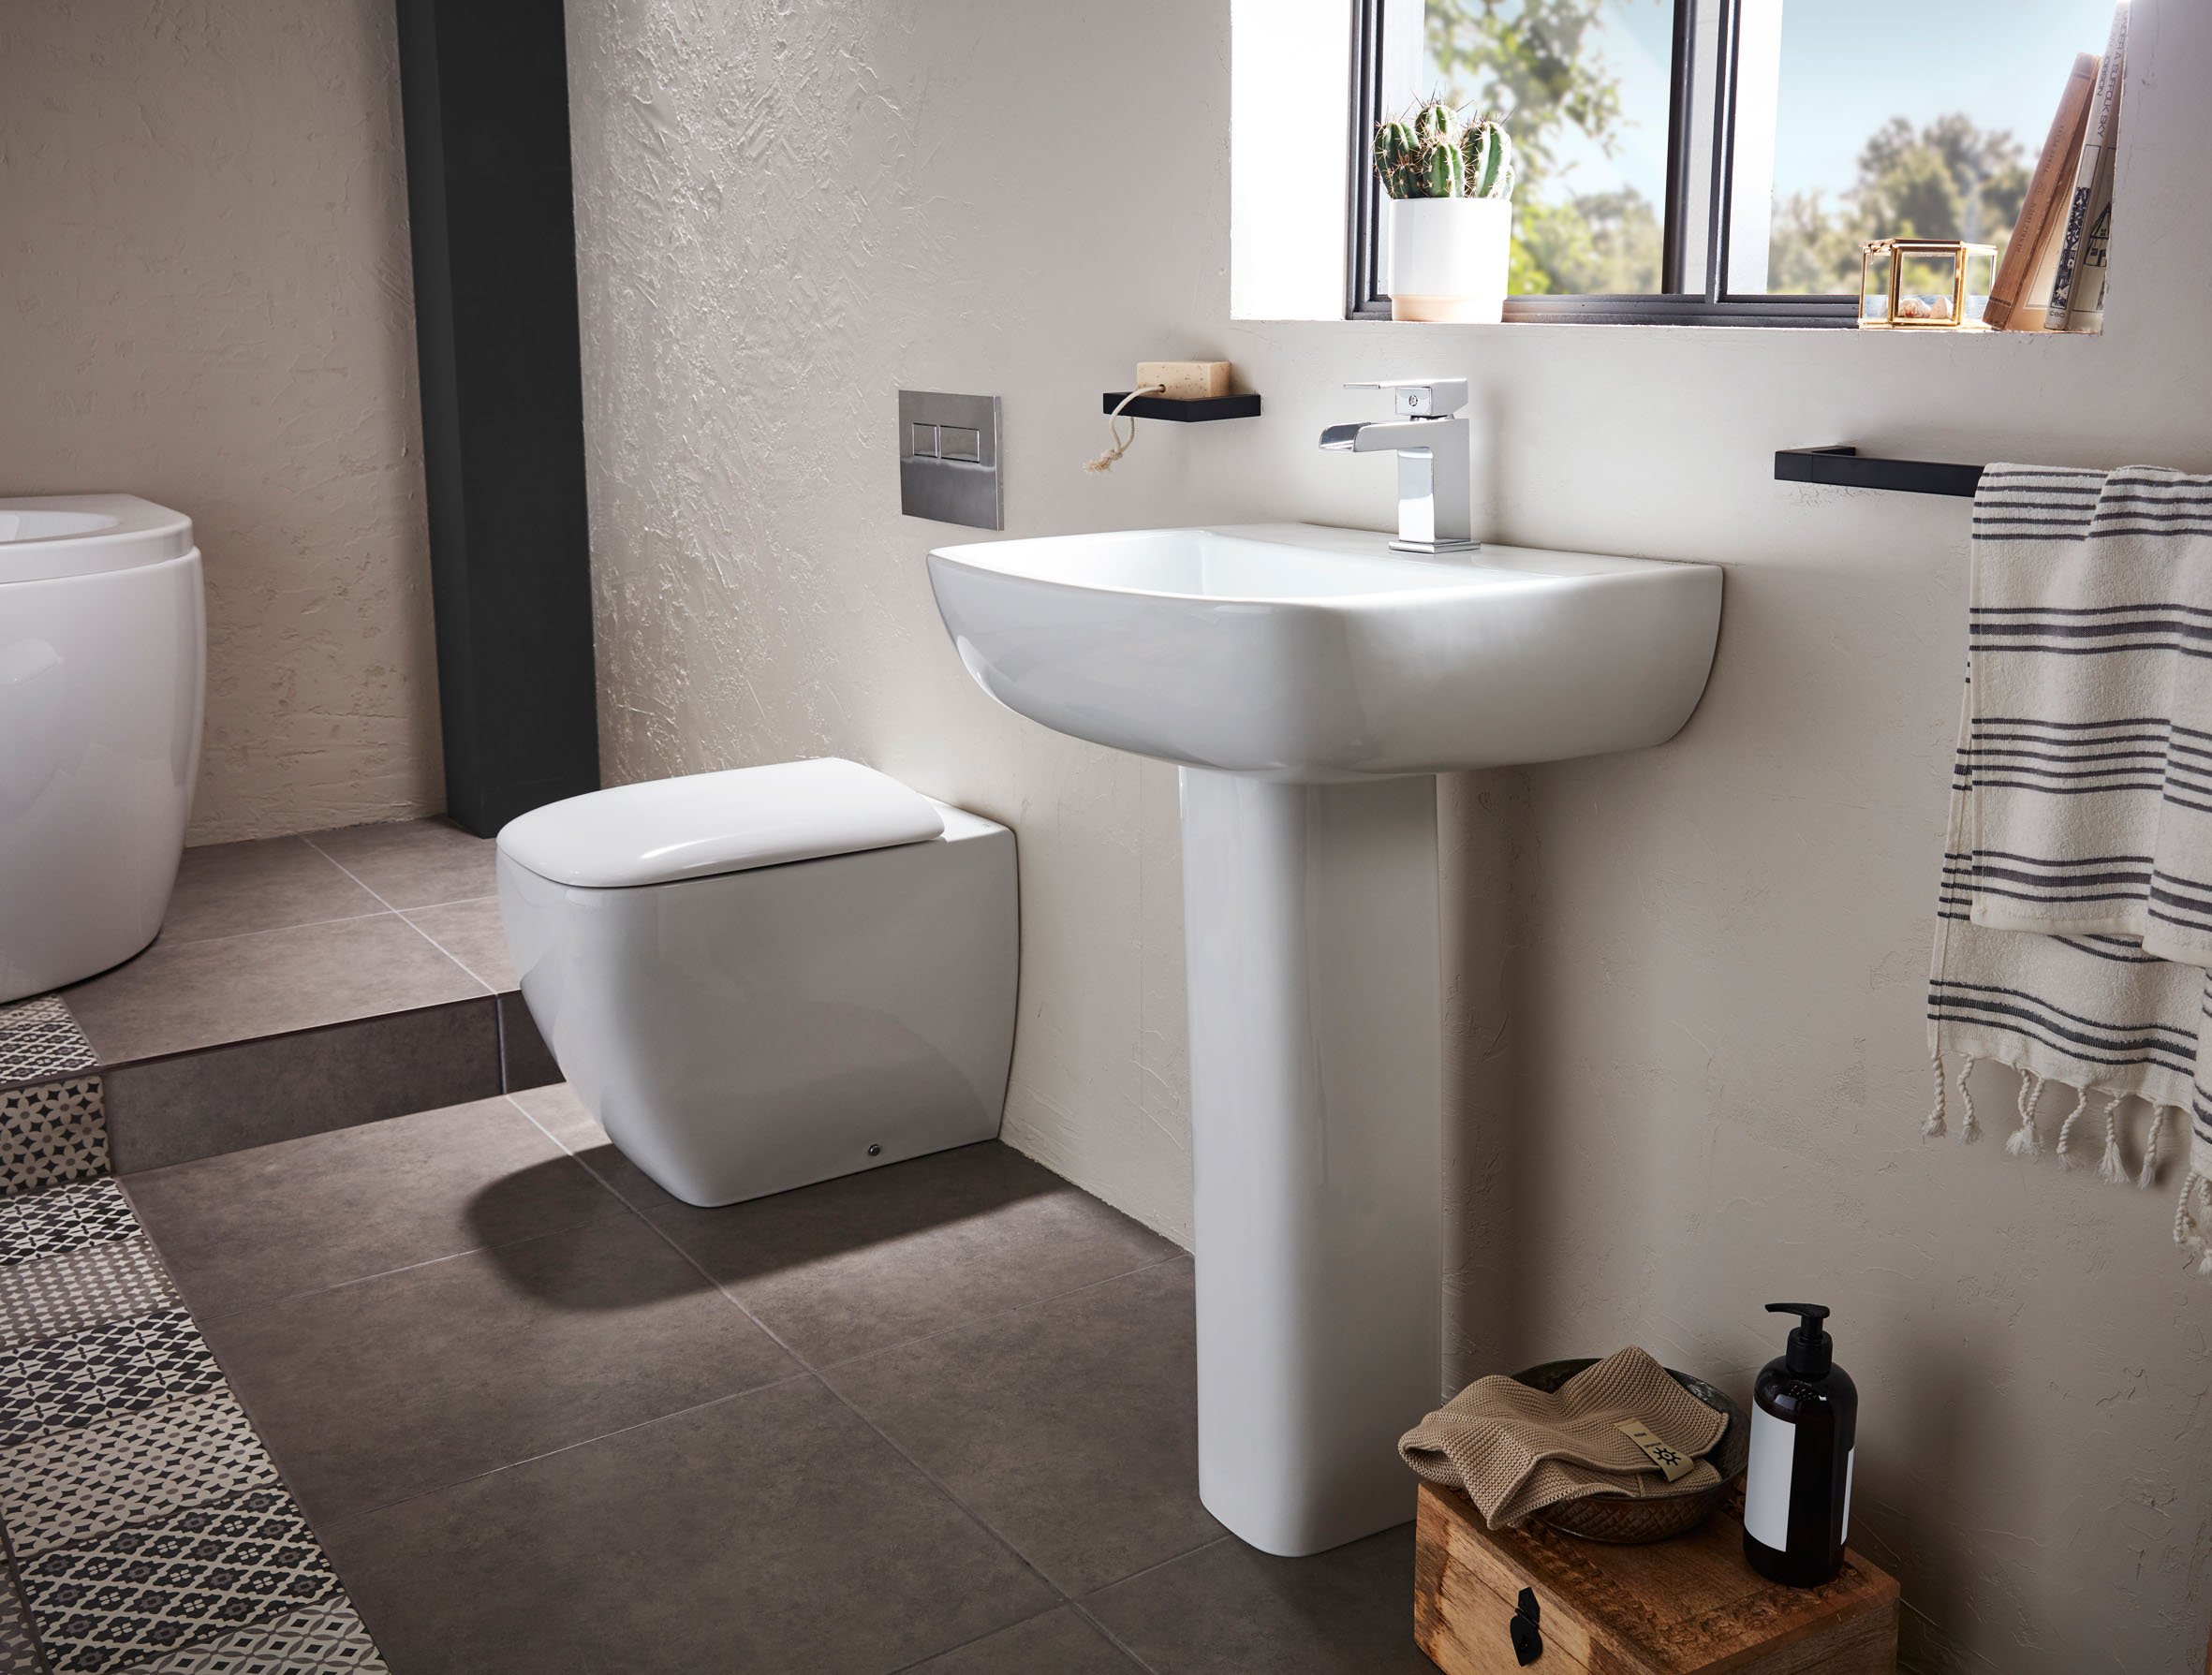 What is Different When Designing an Ensuite Bathroom?